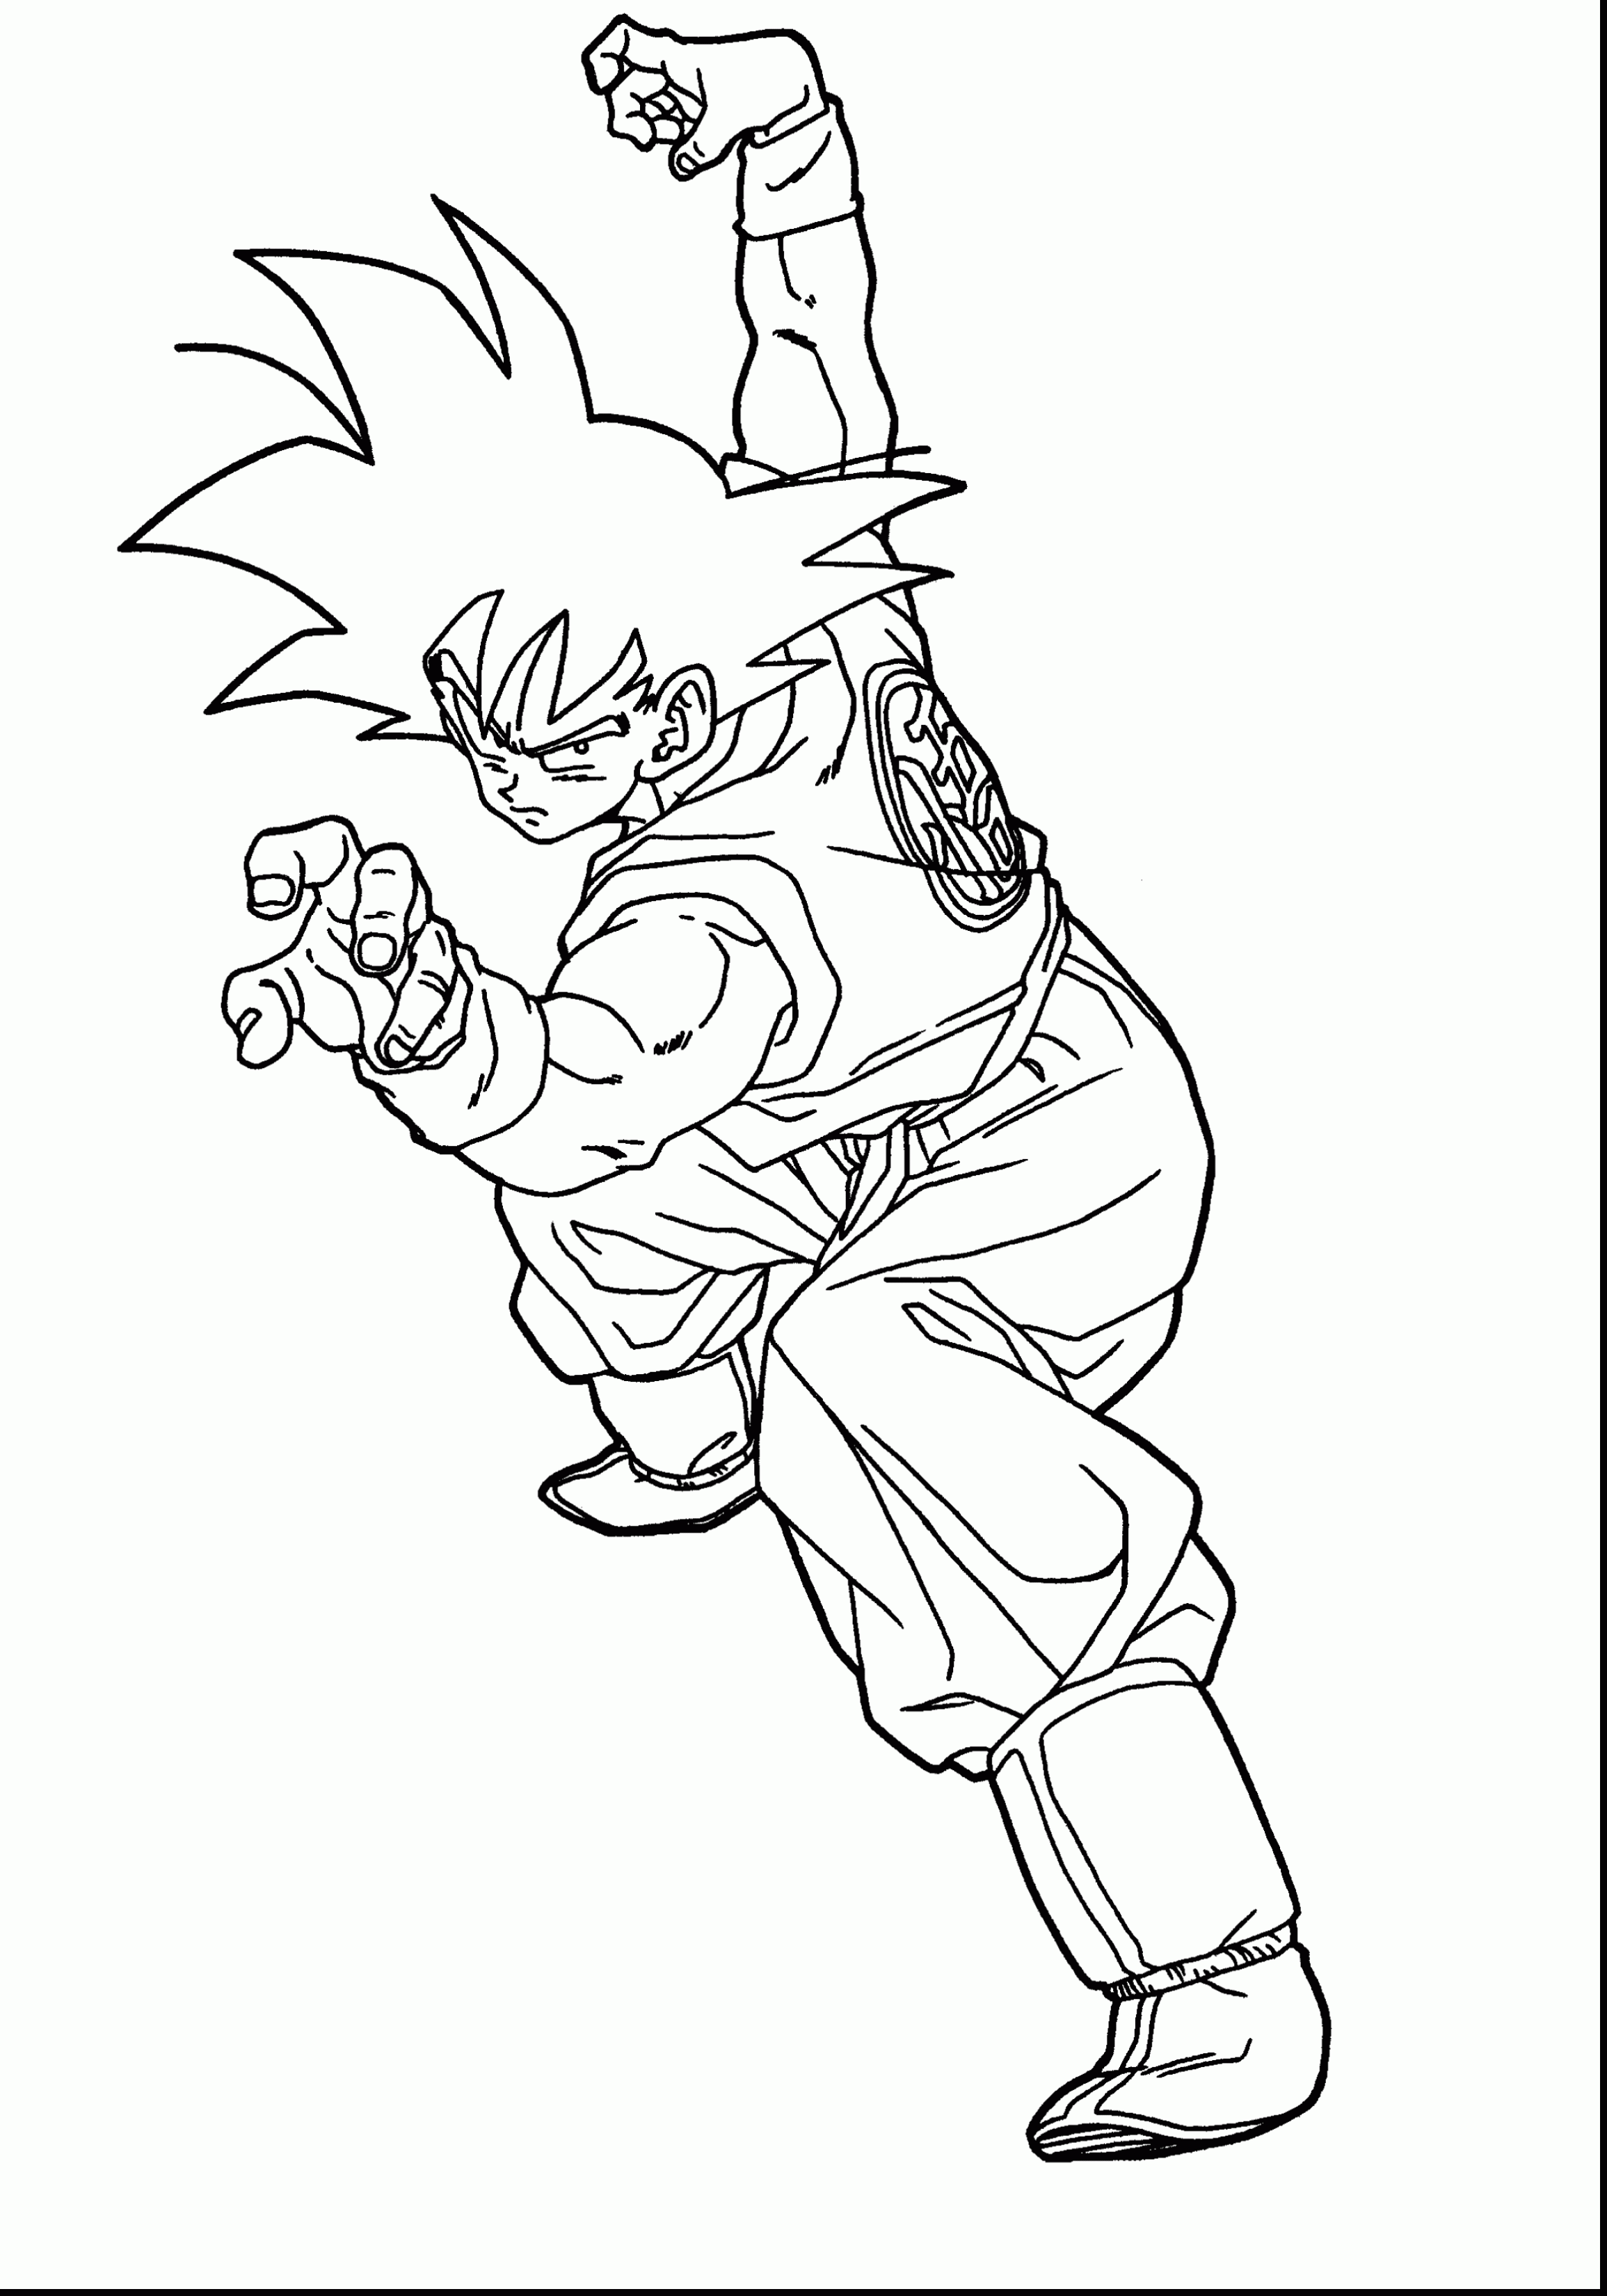 dragonball z coloring book pictures